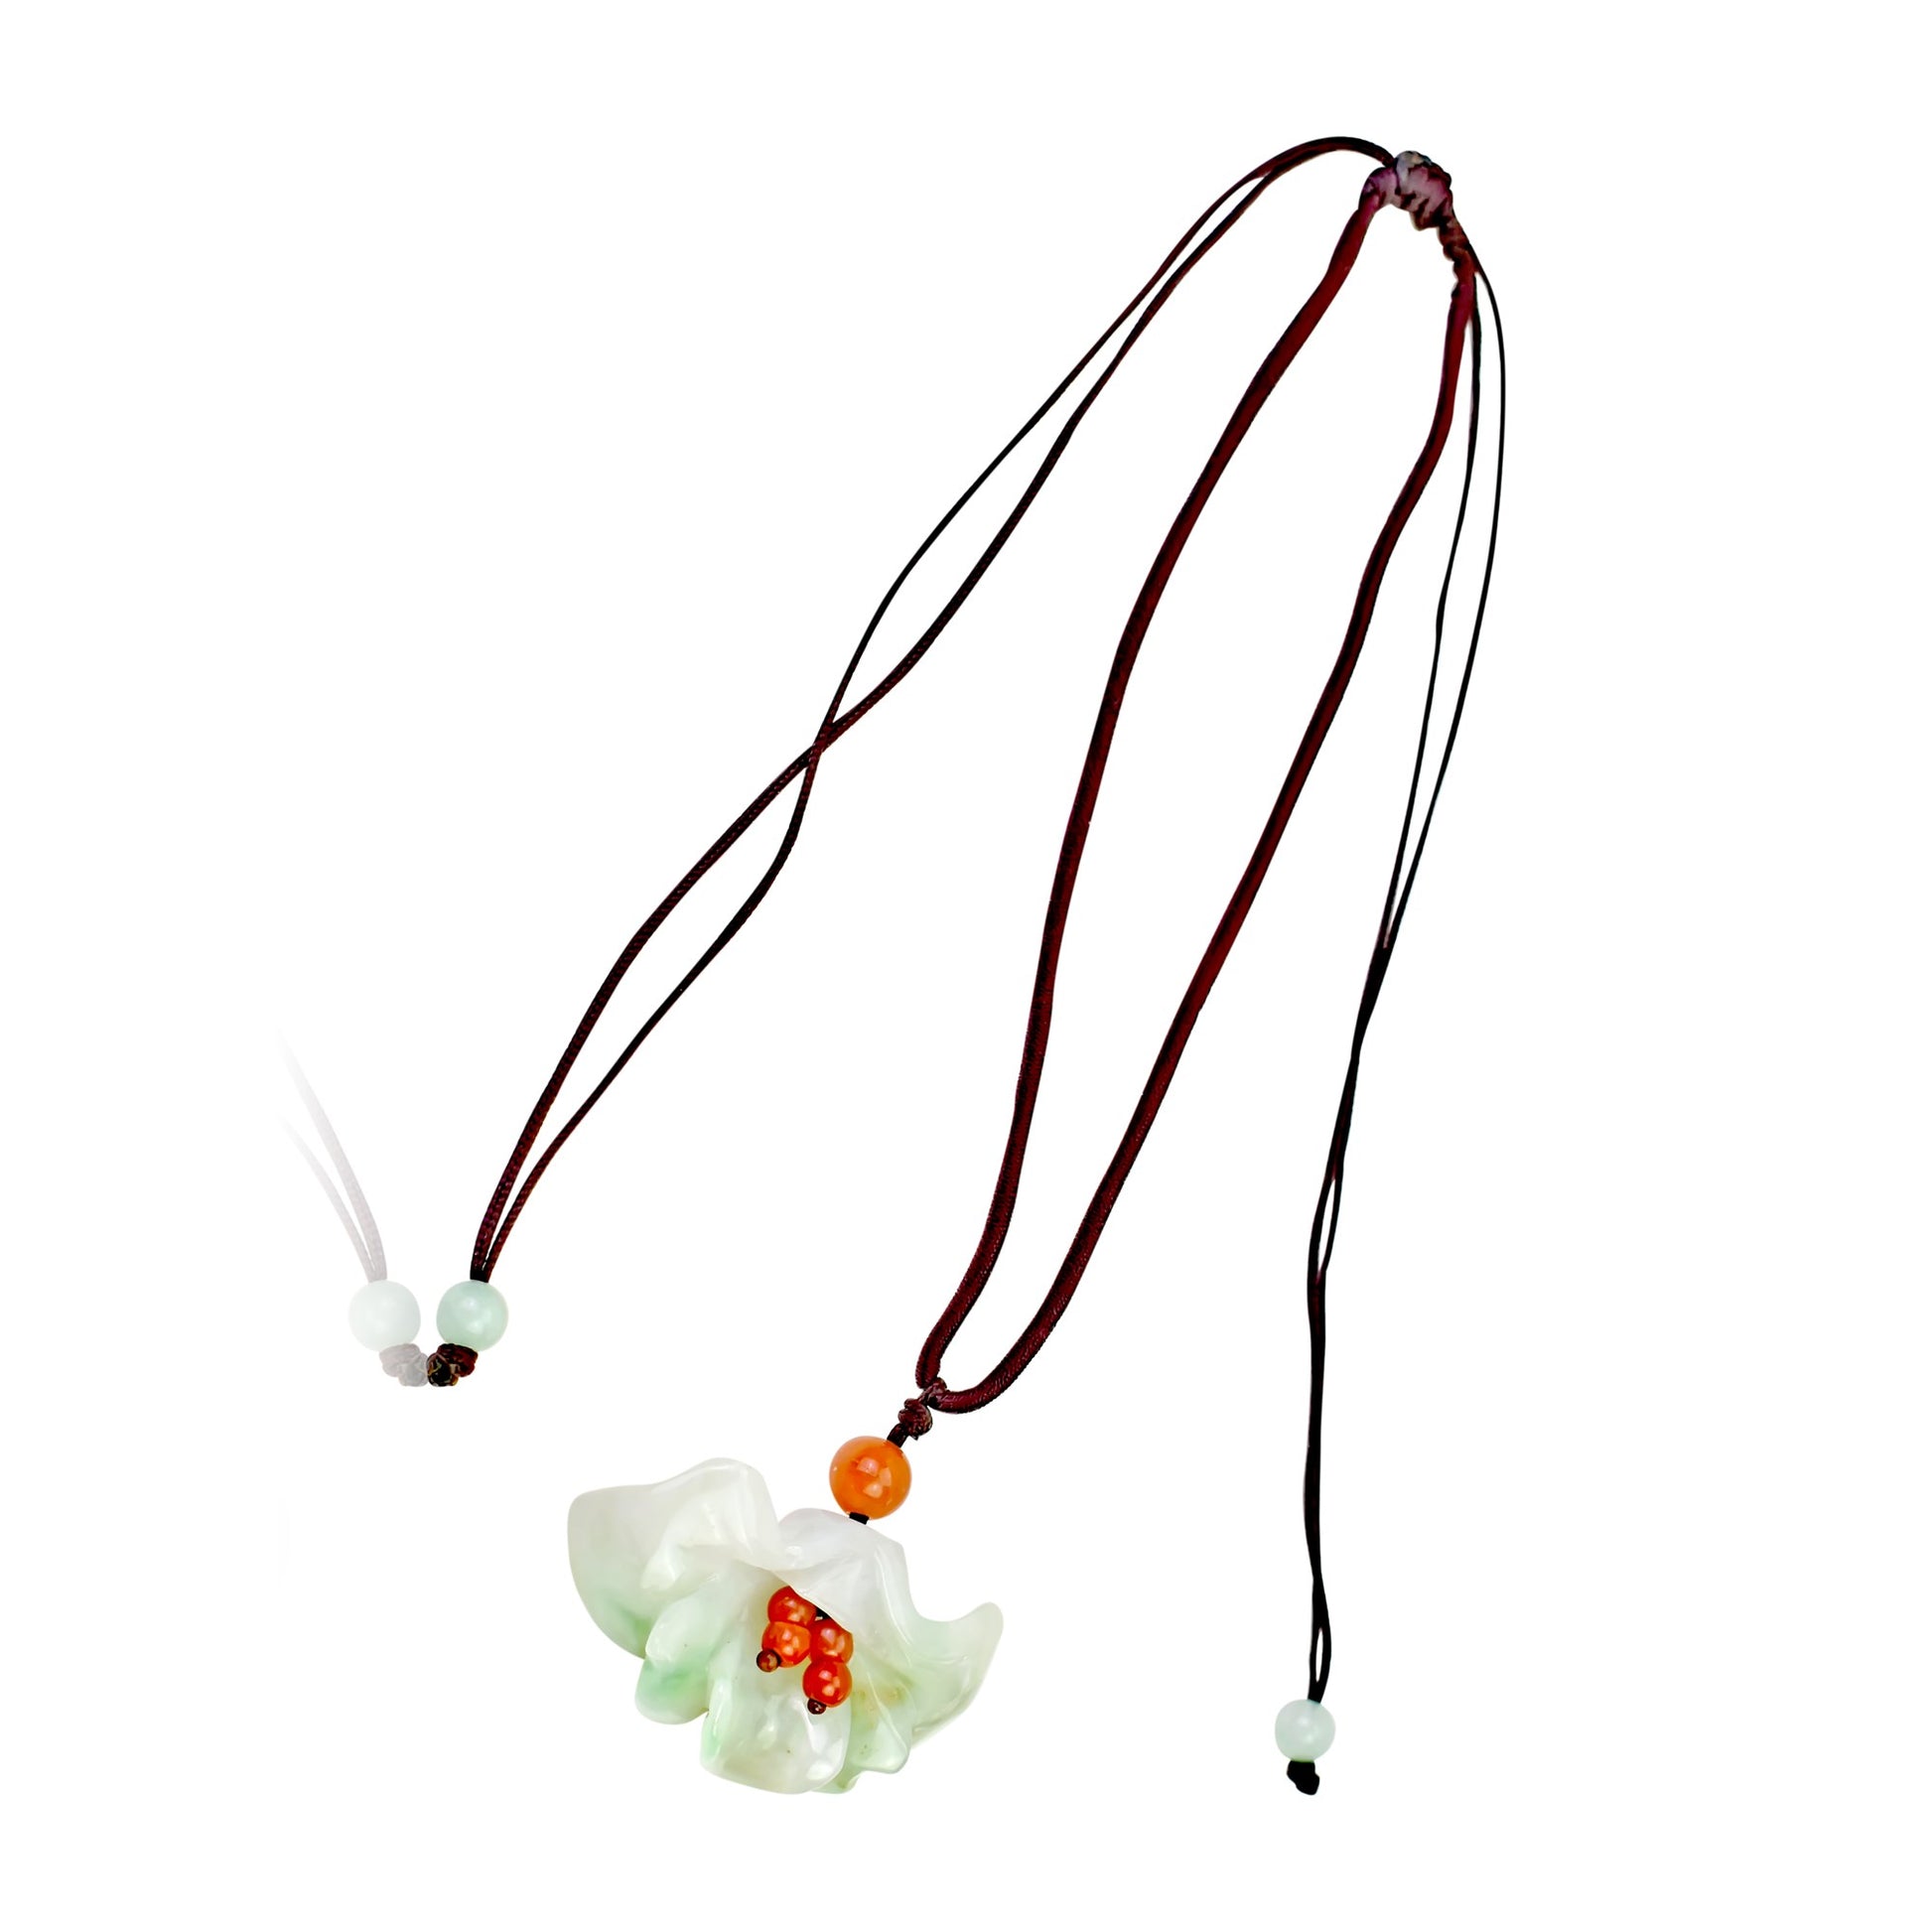 Find Grace and Elegance with a Firecracker Flower Necklace